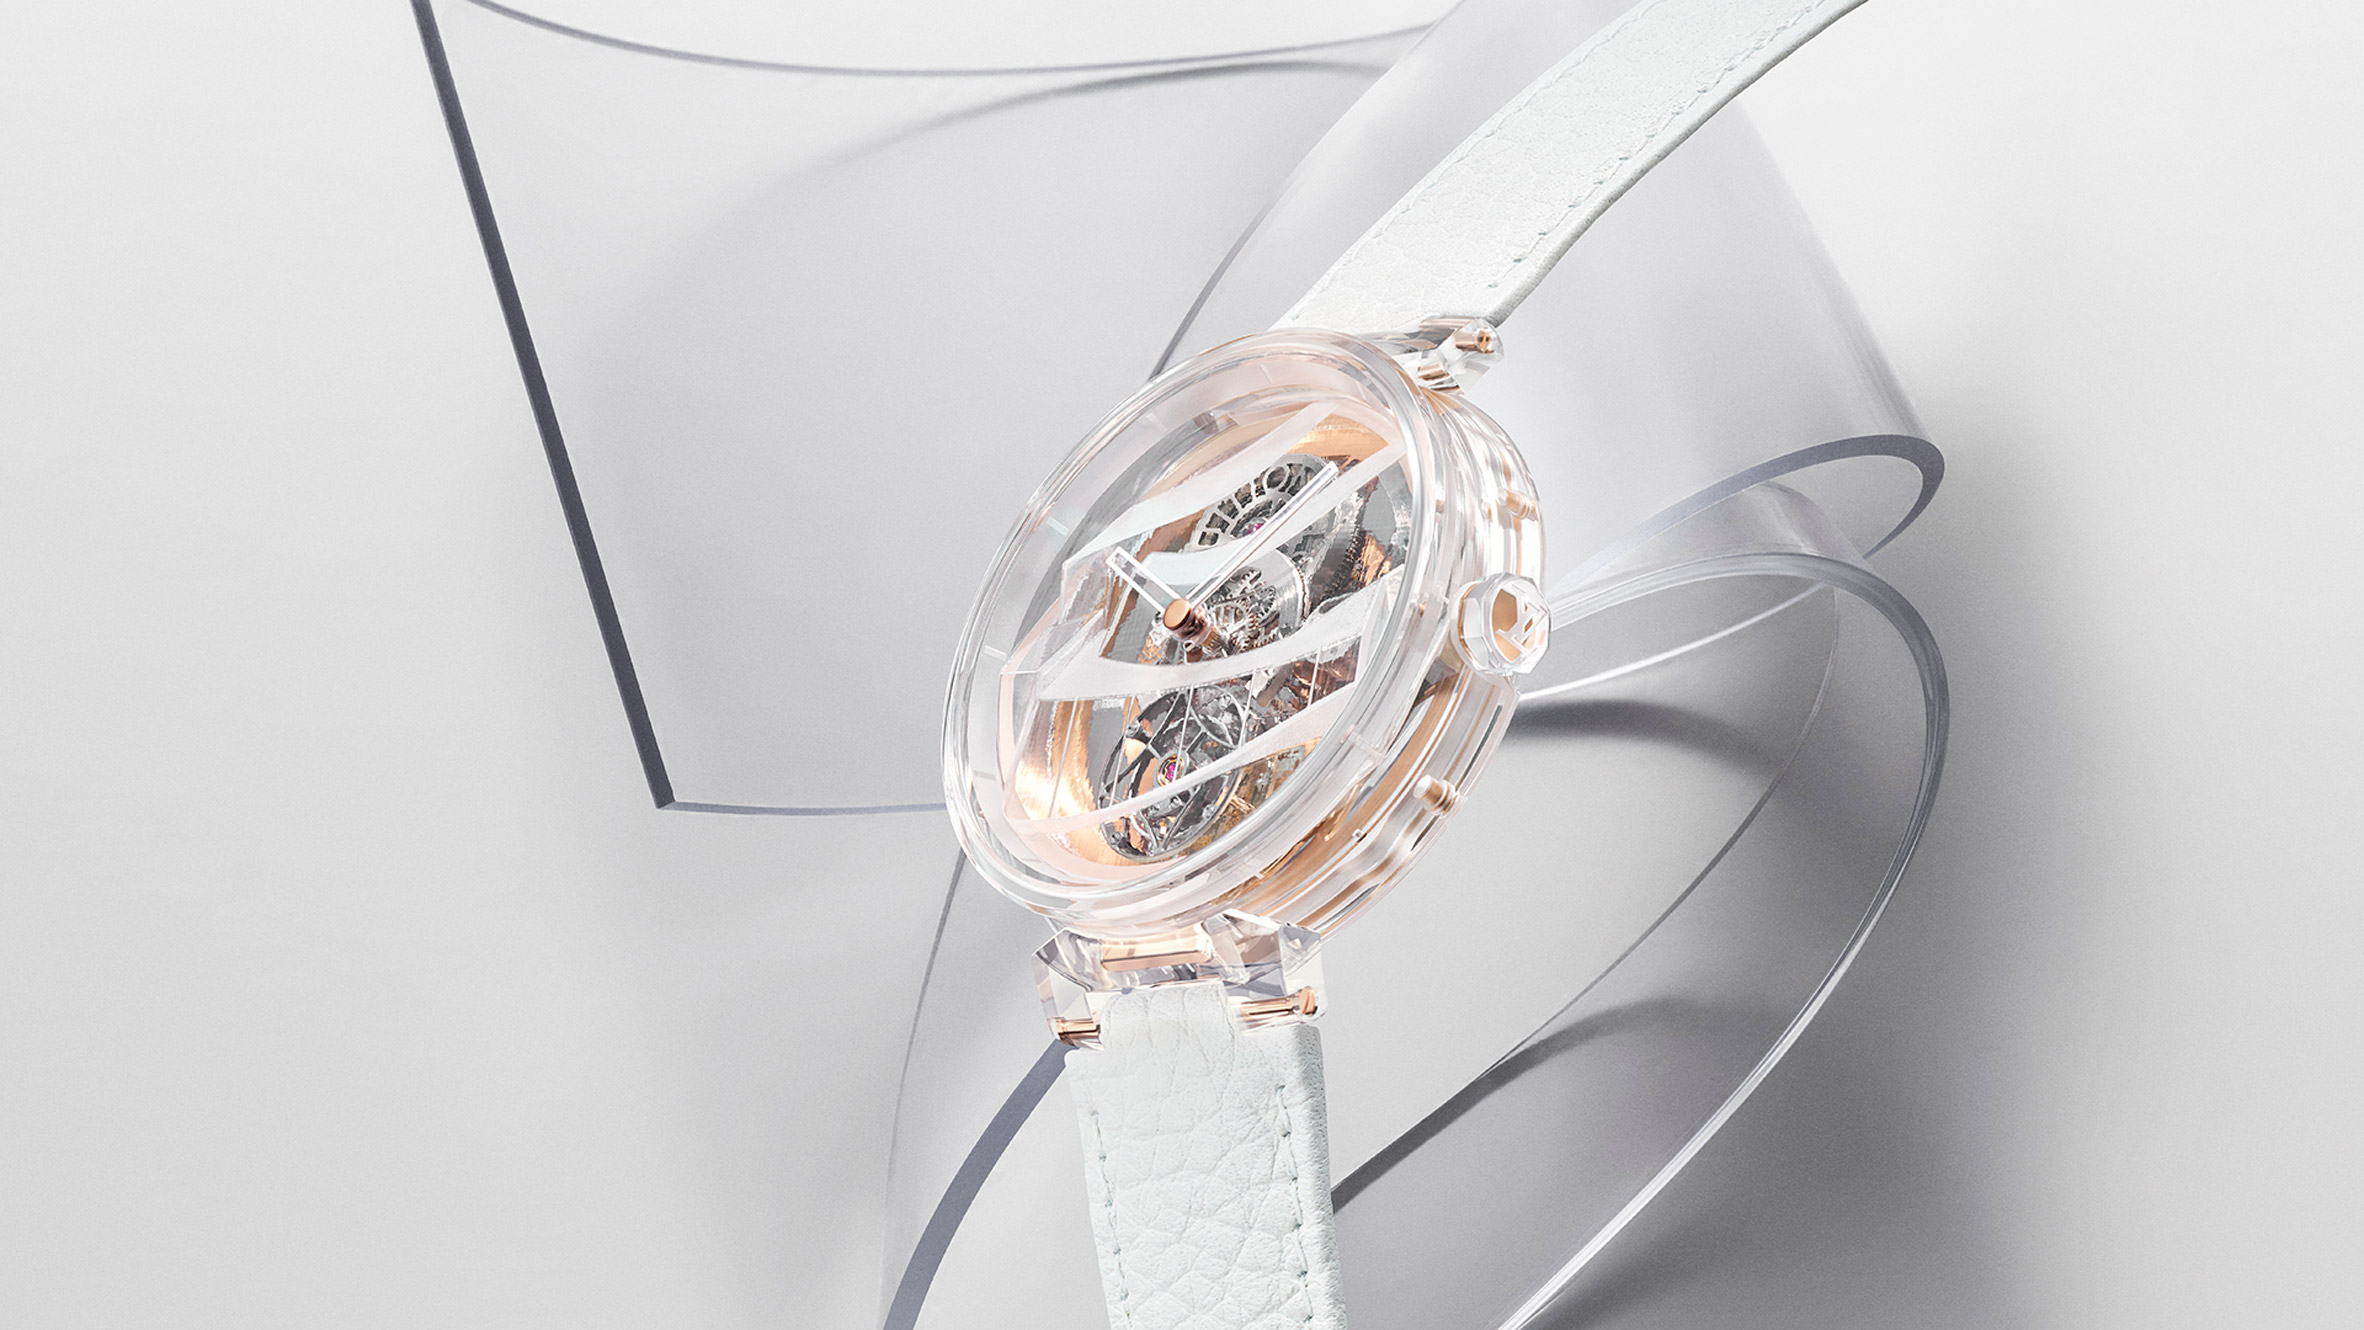 Frank Gehry creates transparent watch for Louis Vuitton